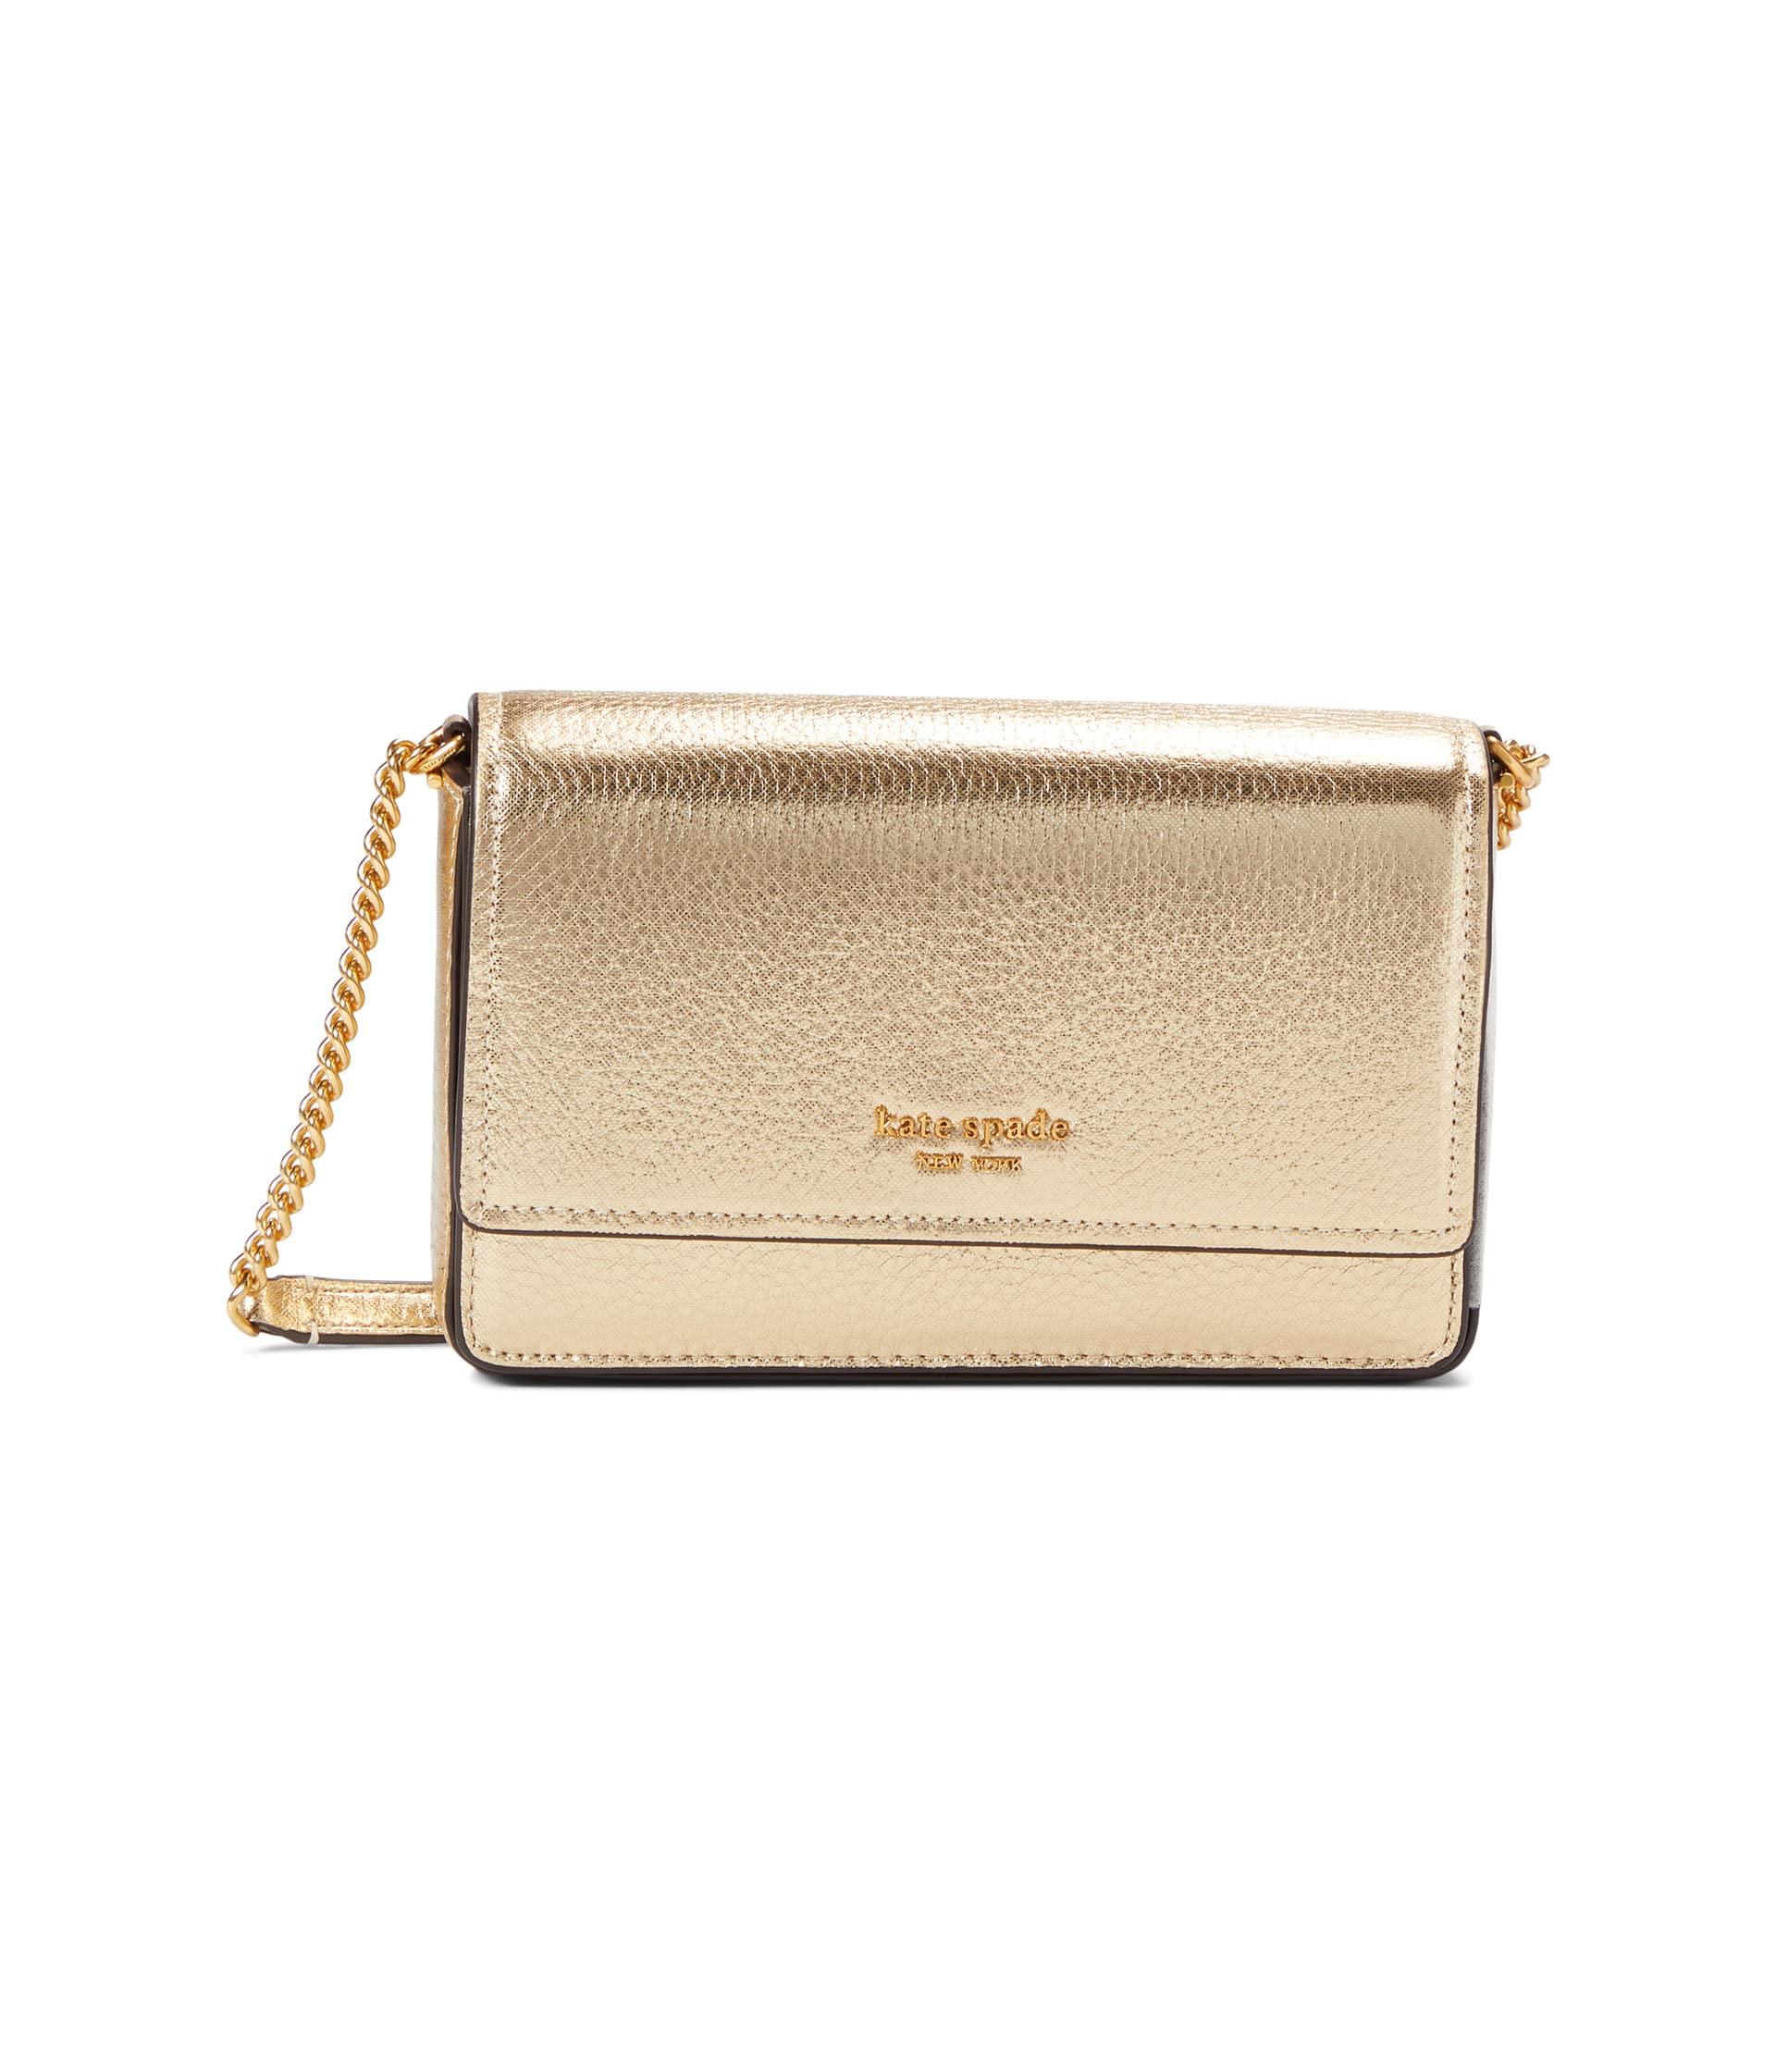 Kate Spade Morgan Metallic Leather Flap Chain Wallet in Gold (Natural ...